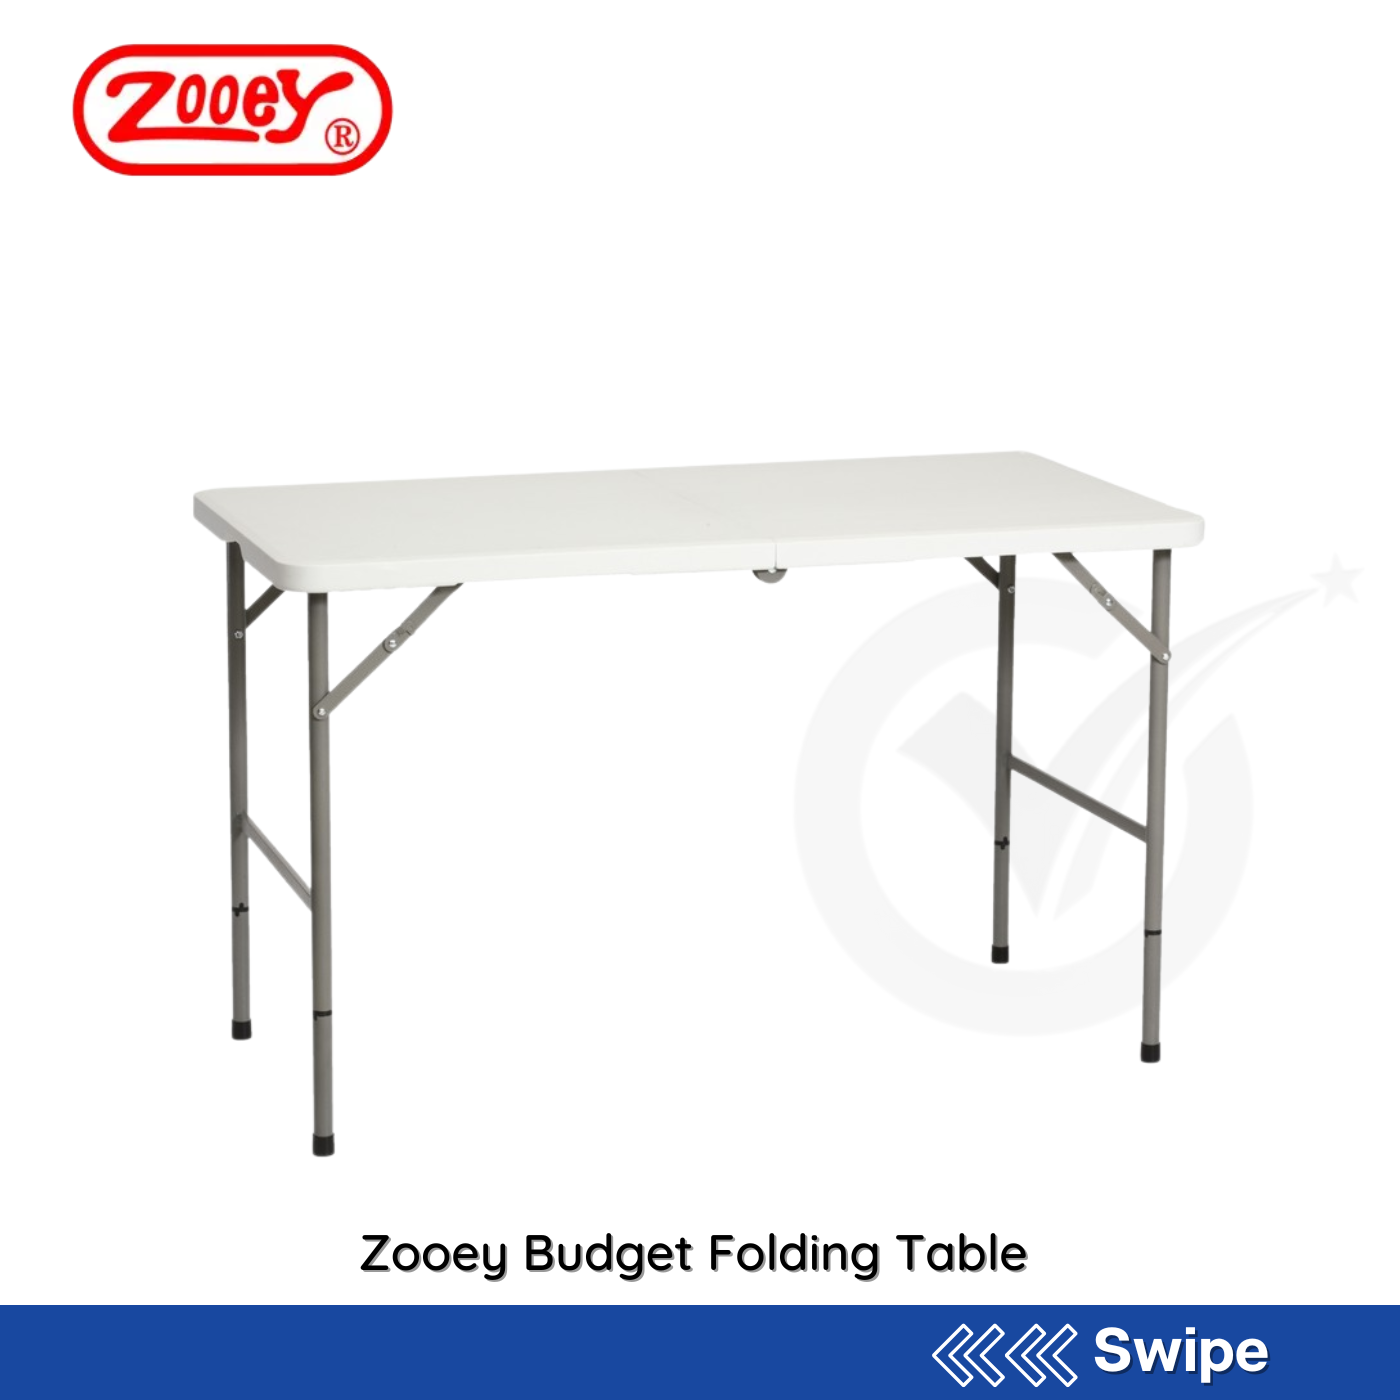 Zooey Budget Folding Table